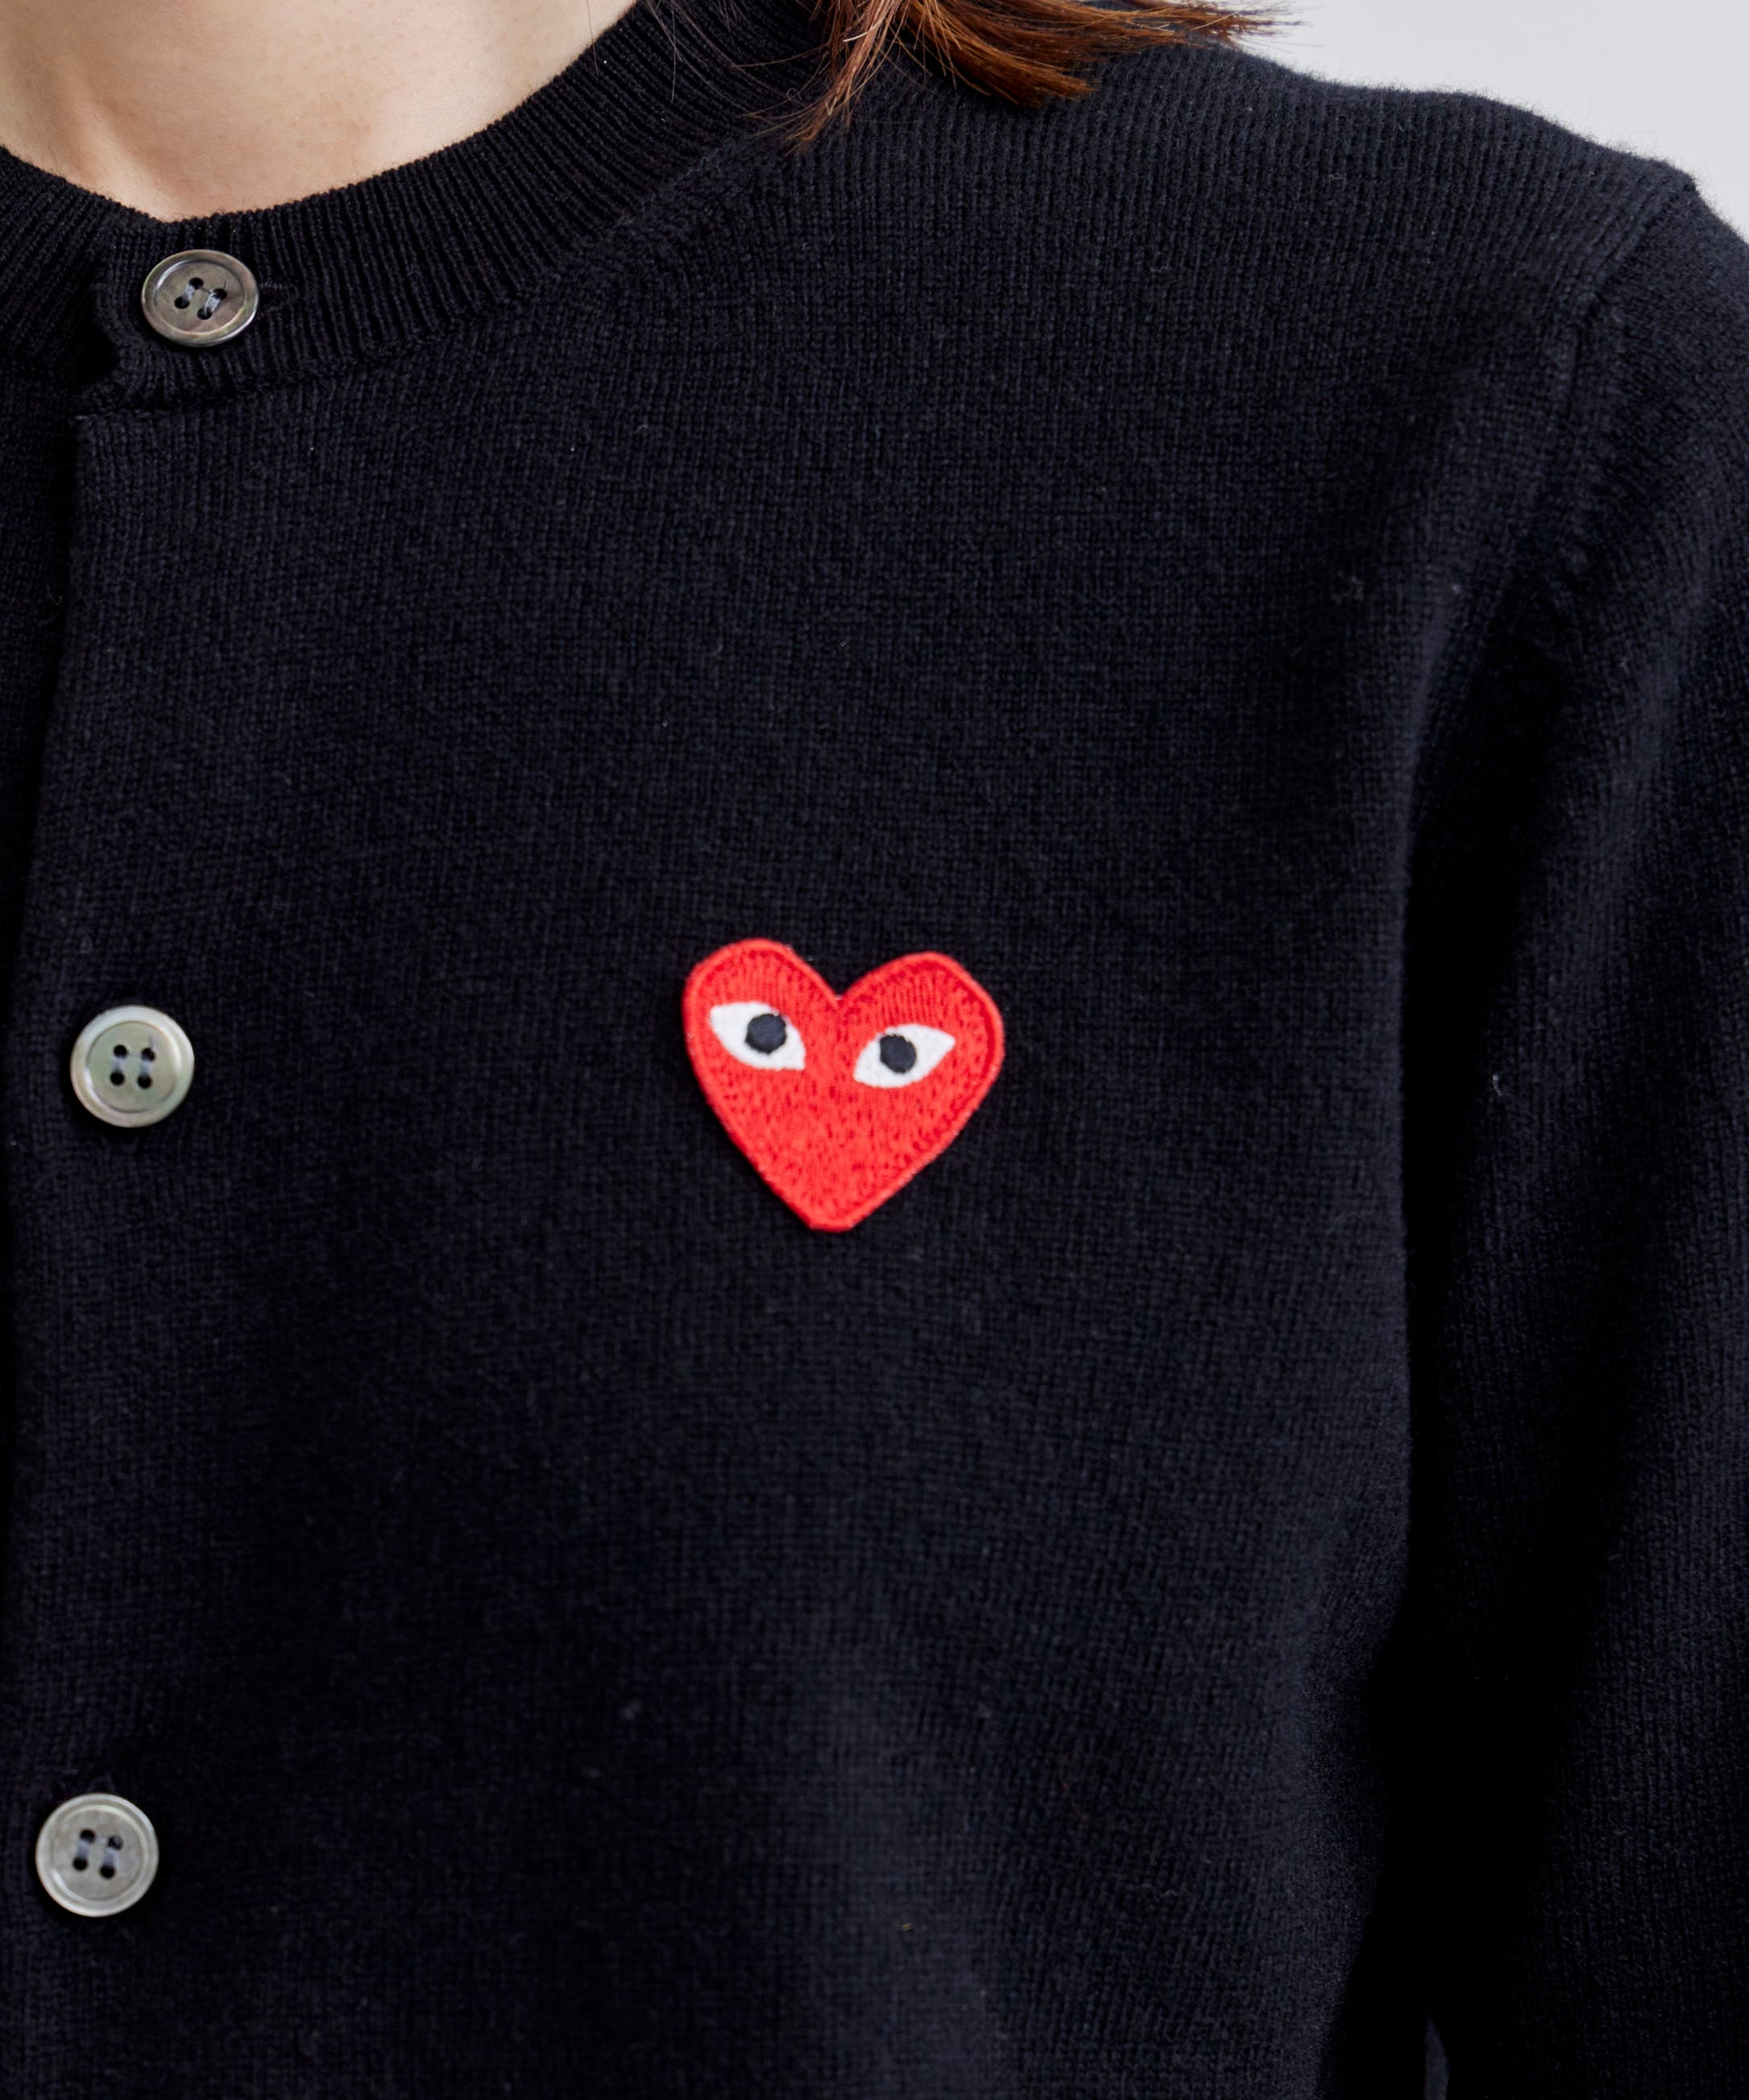 ROUND-NECK CARDIGAN RED EMBLEM RED HEART PLAY Comme des Garcons